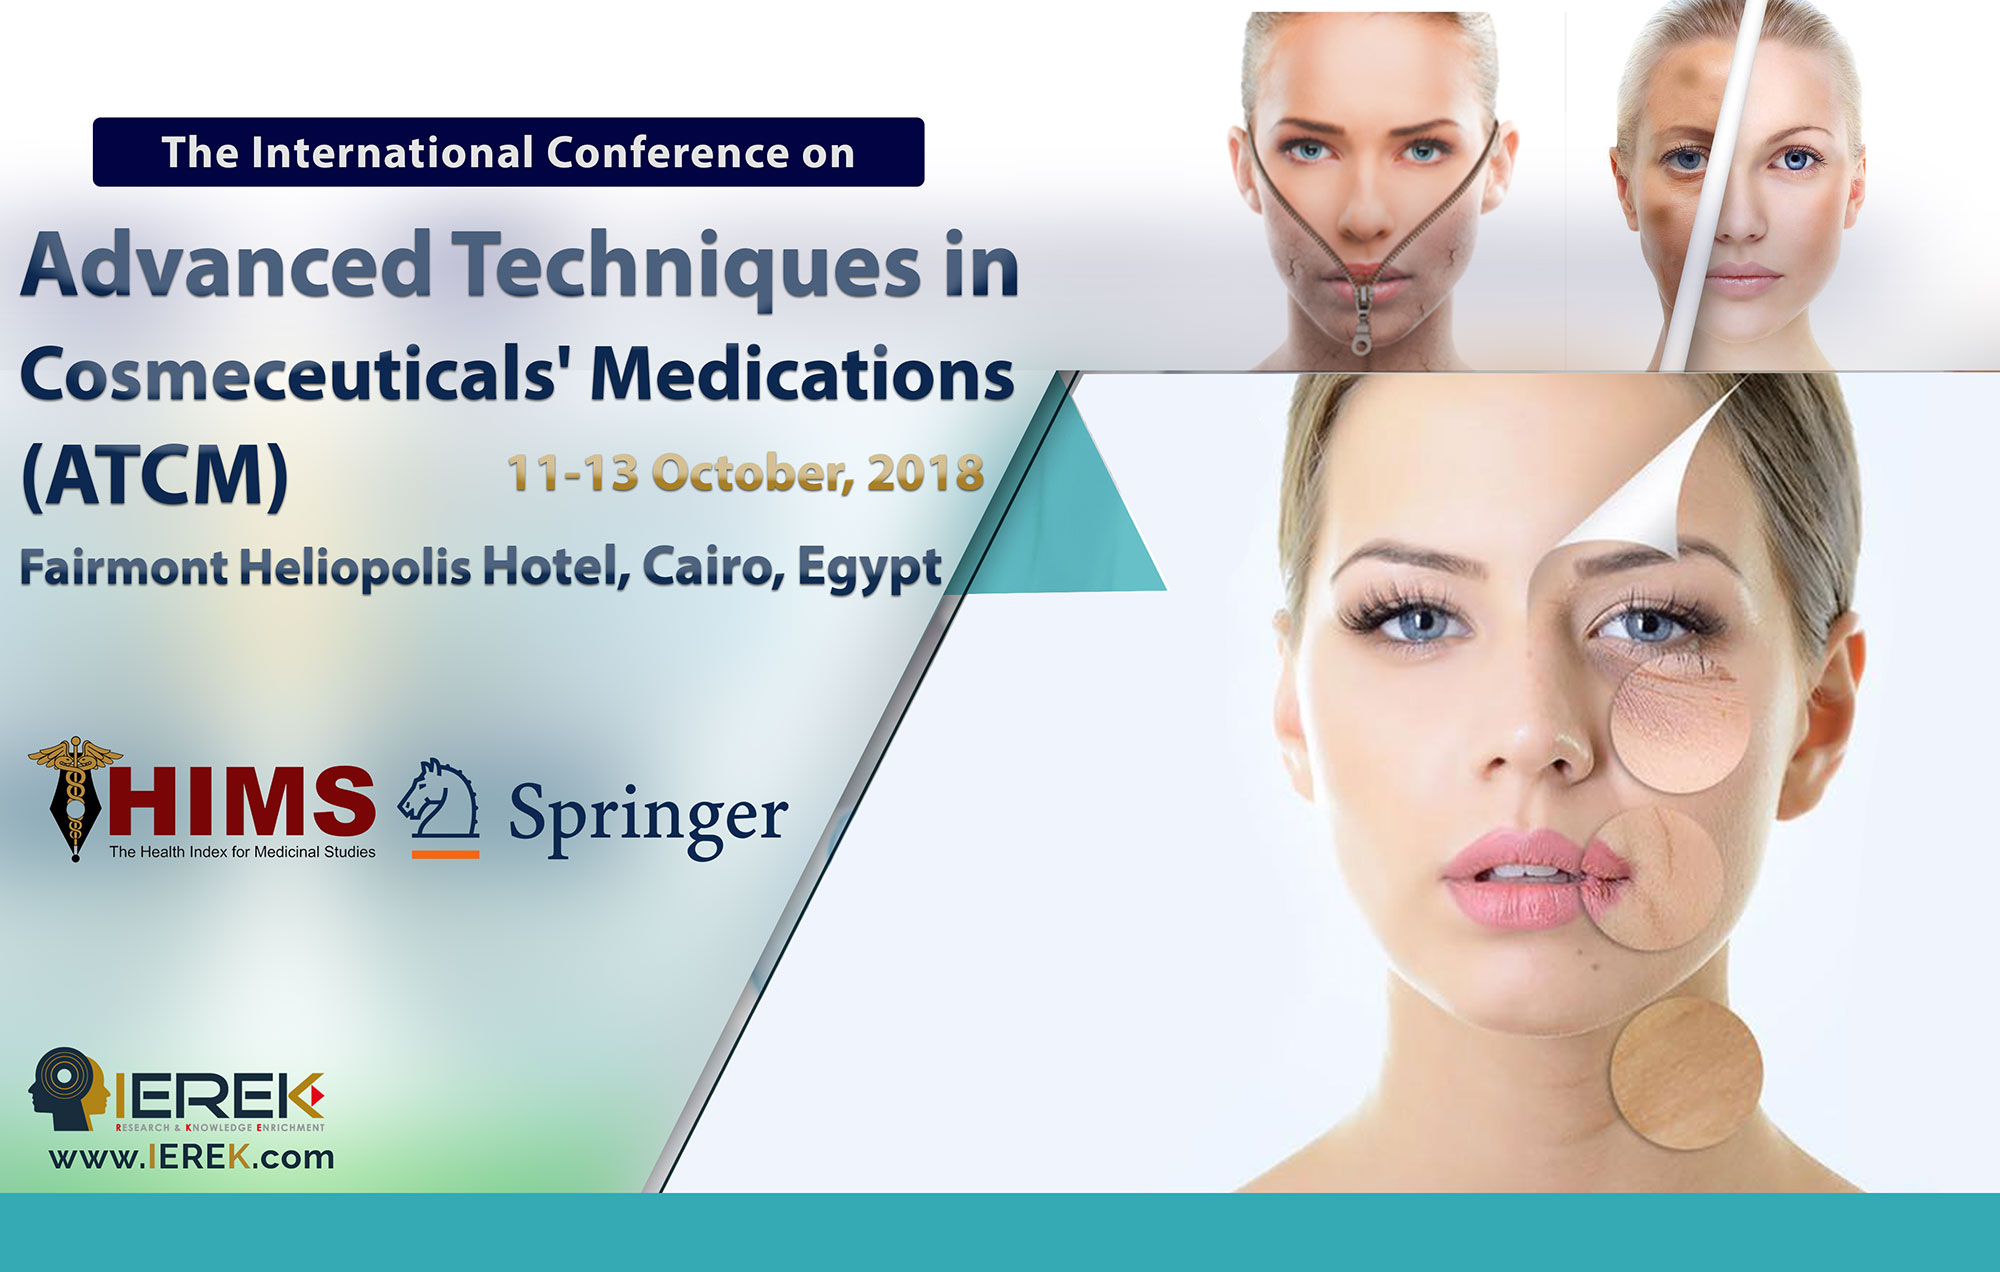 Advanced Techniques in Cosmeceuticals' Medications (ATCM)